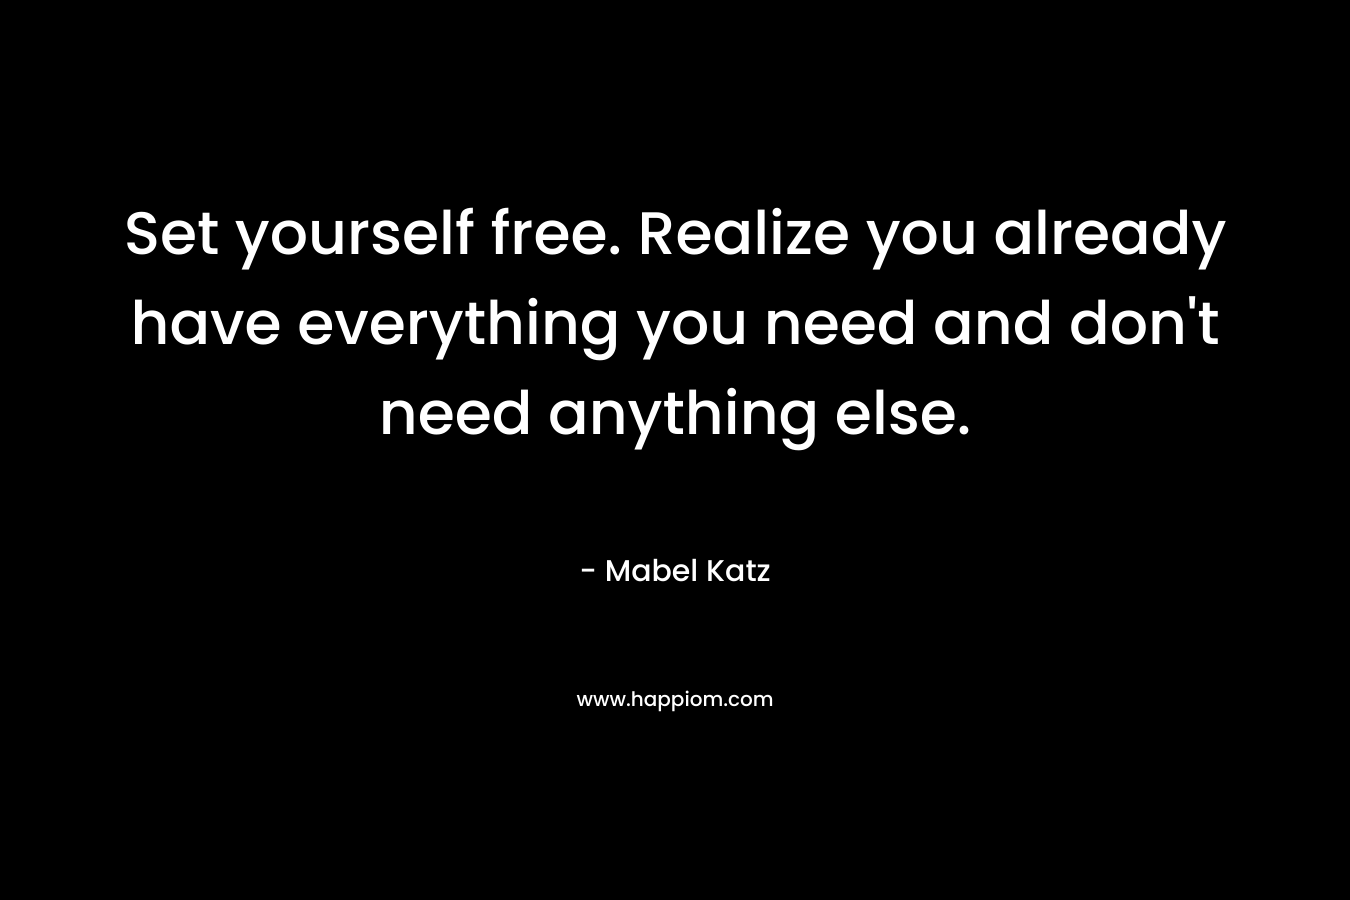 Set yourself free. Realize you already have everything you need and don't need anything else.